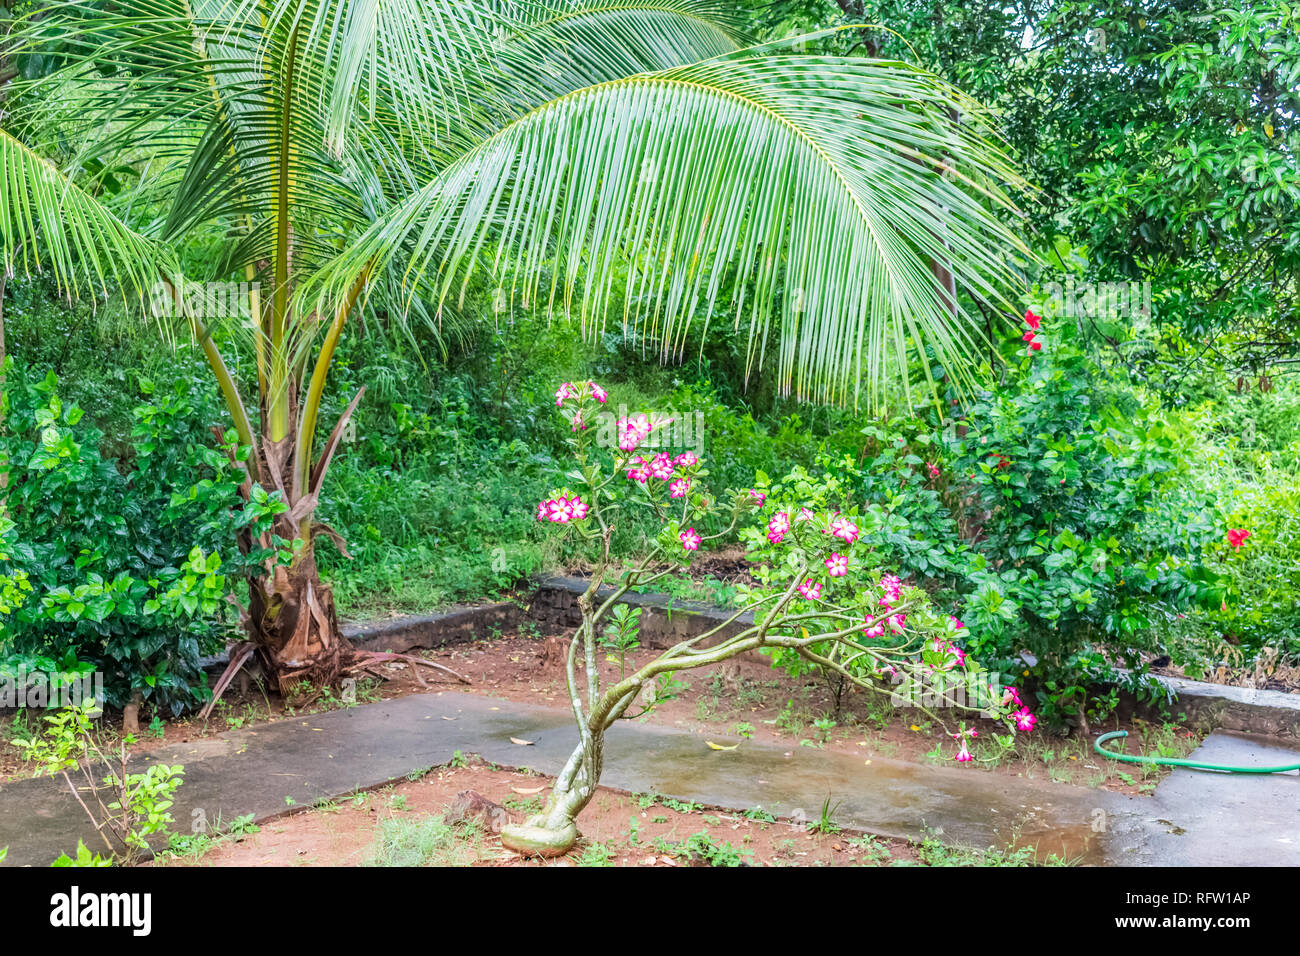 small coconut trees close view in an Indian garden with colorful flower trees & greenery shrubs. Stock Photo